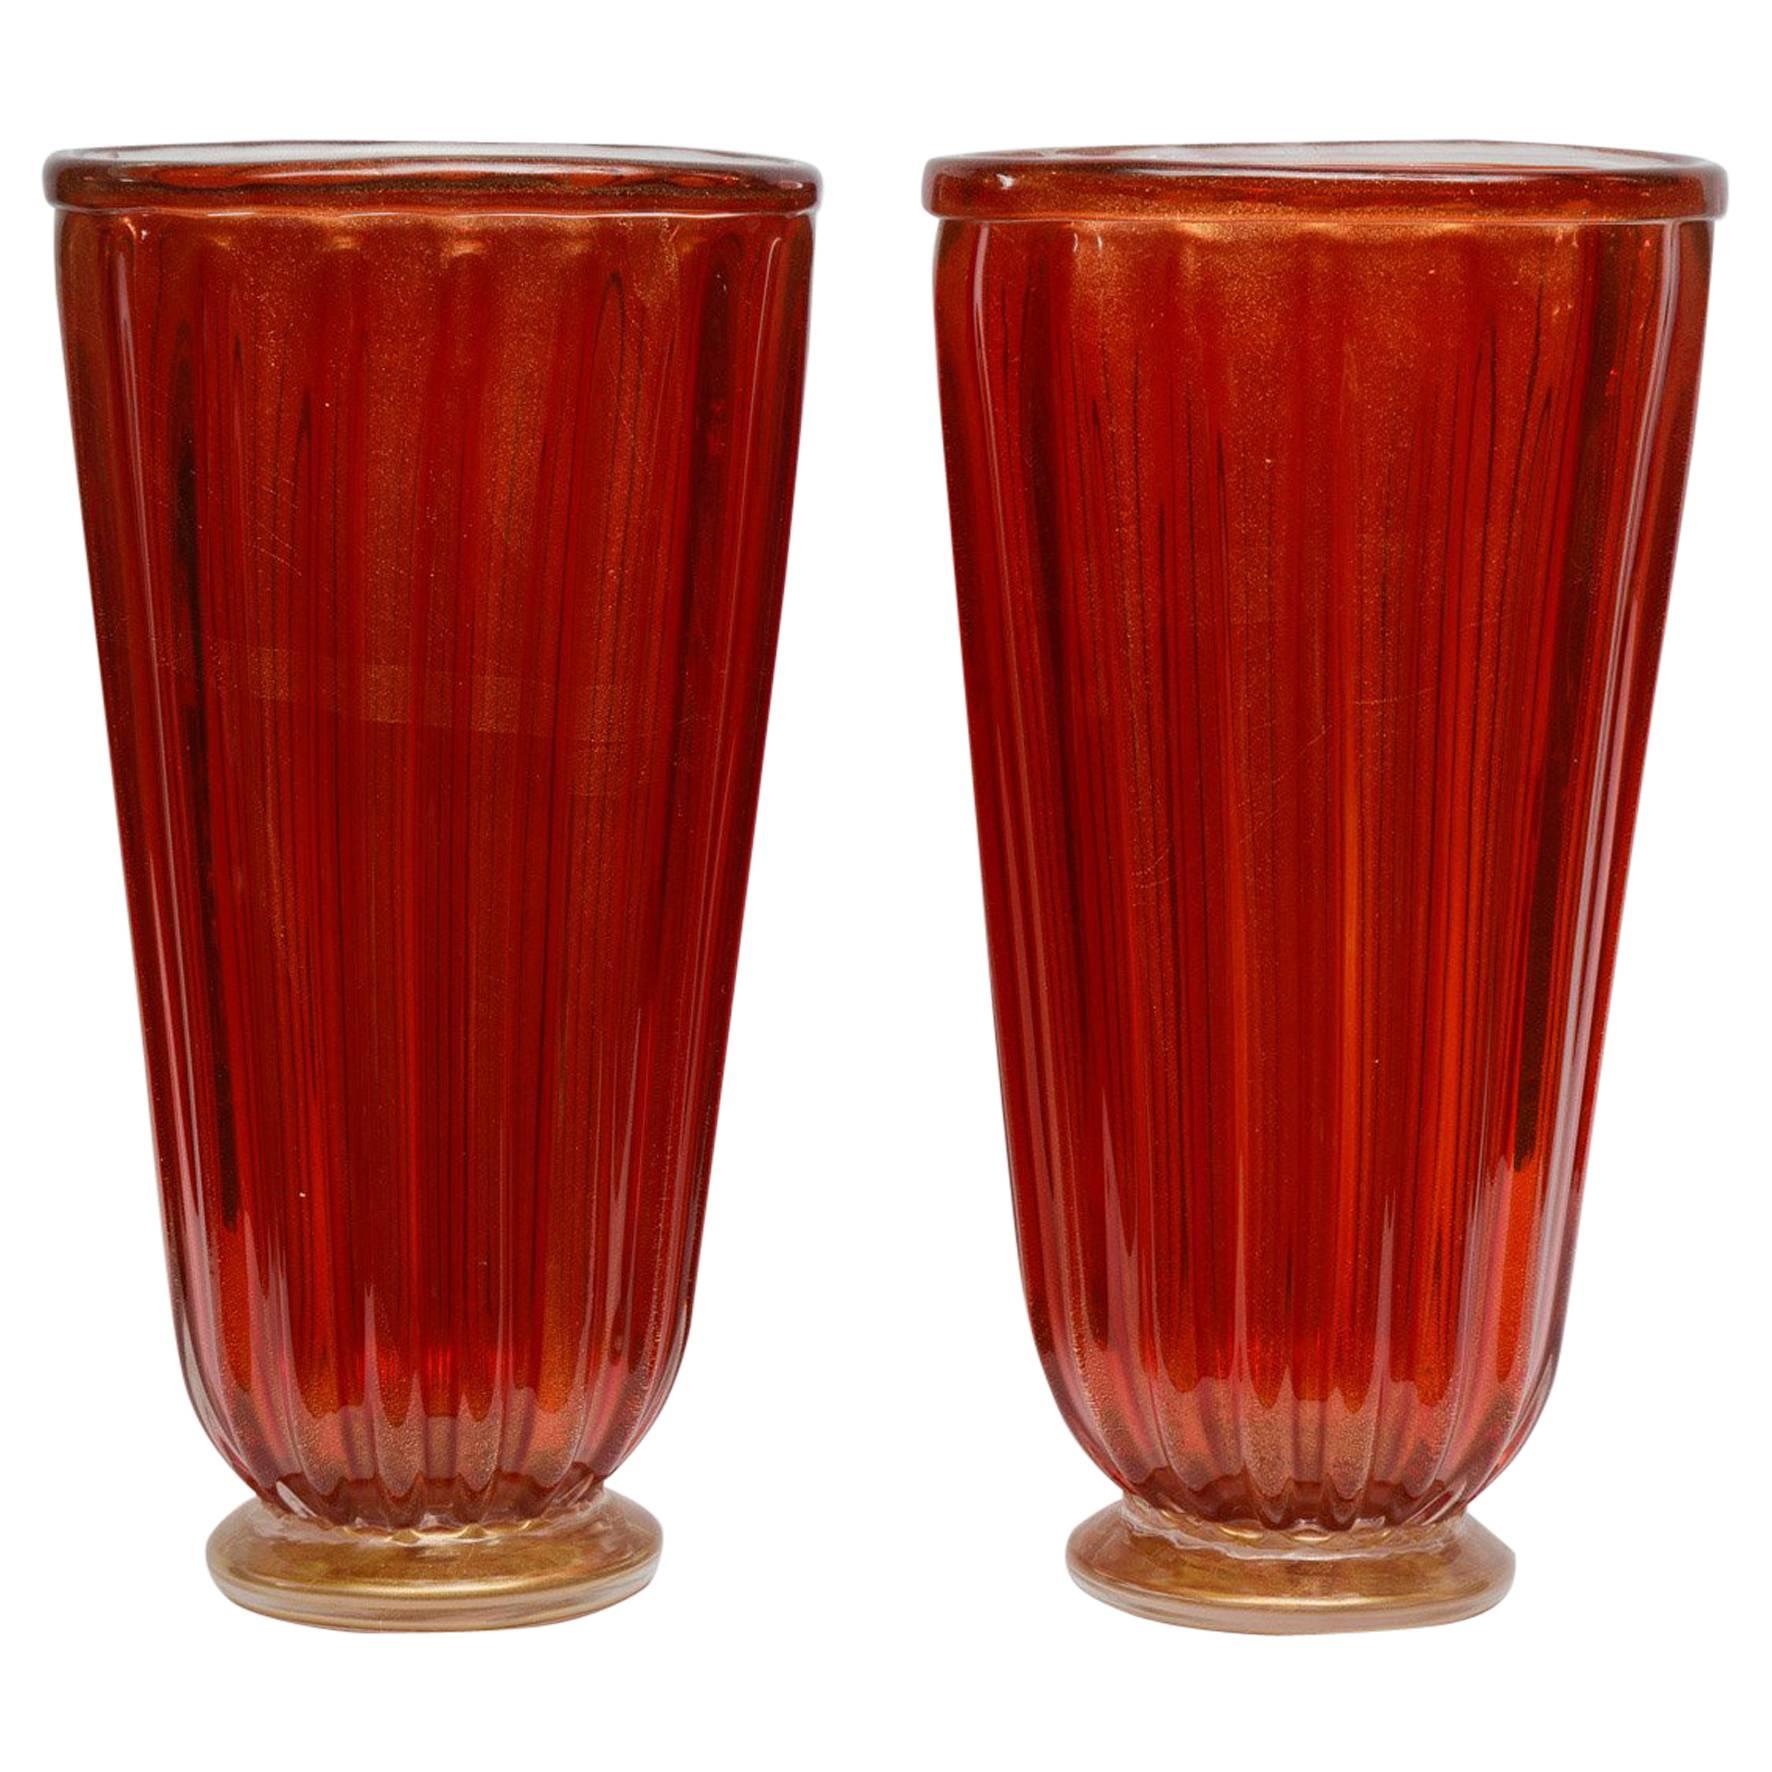 Pair of Vases in Red and Gold Murano Glass Signed by Toso